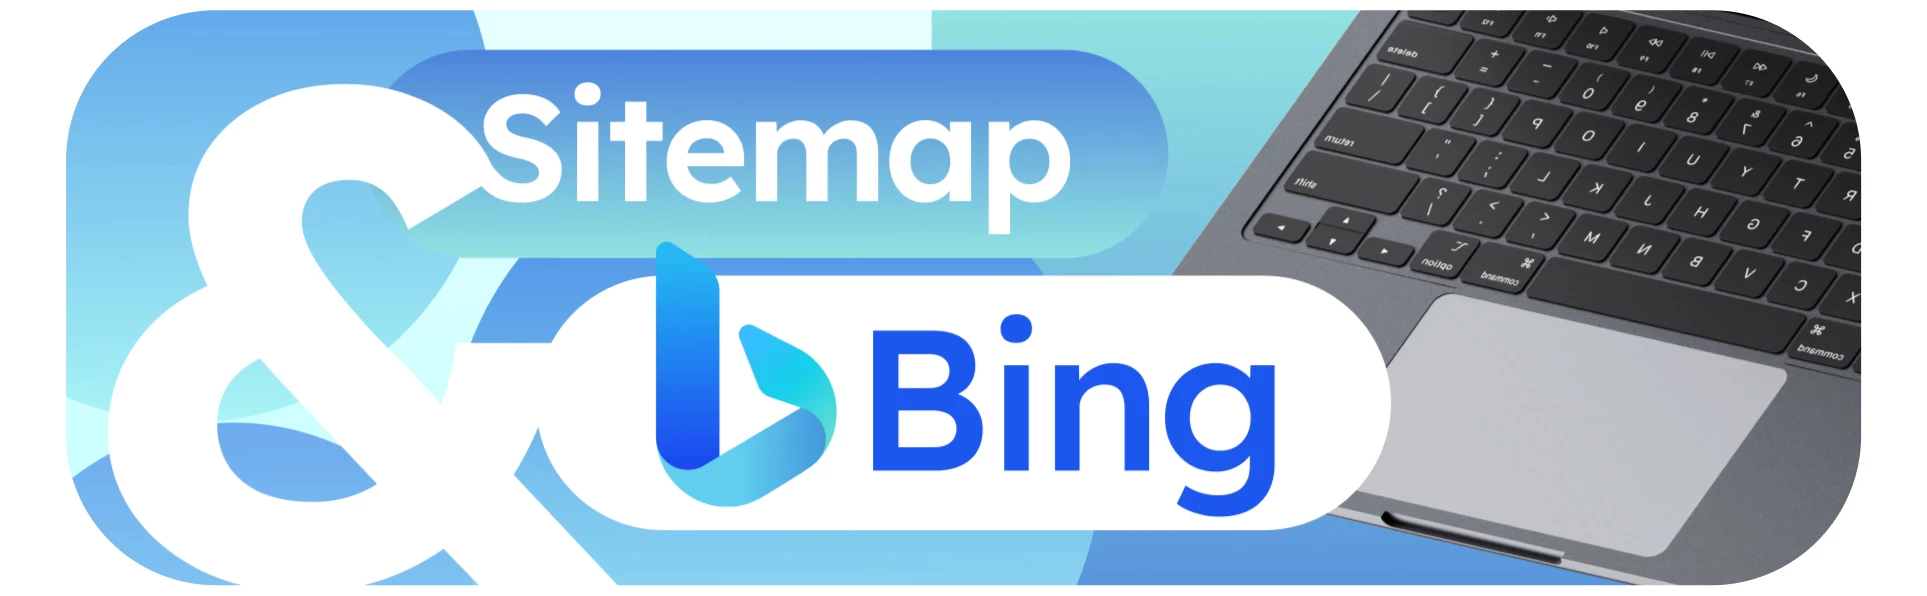 Sitemap and Bing